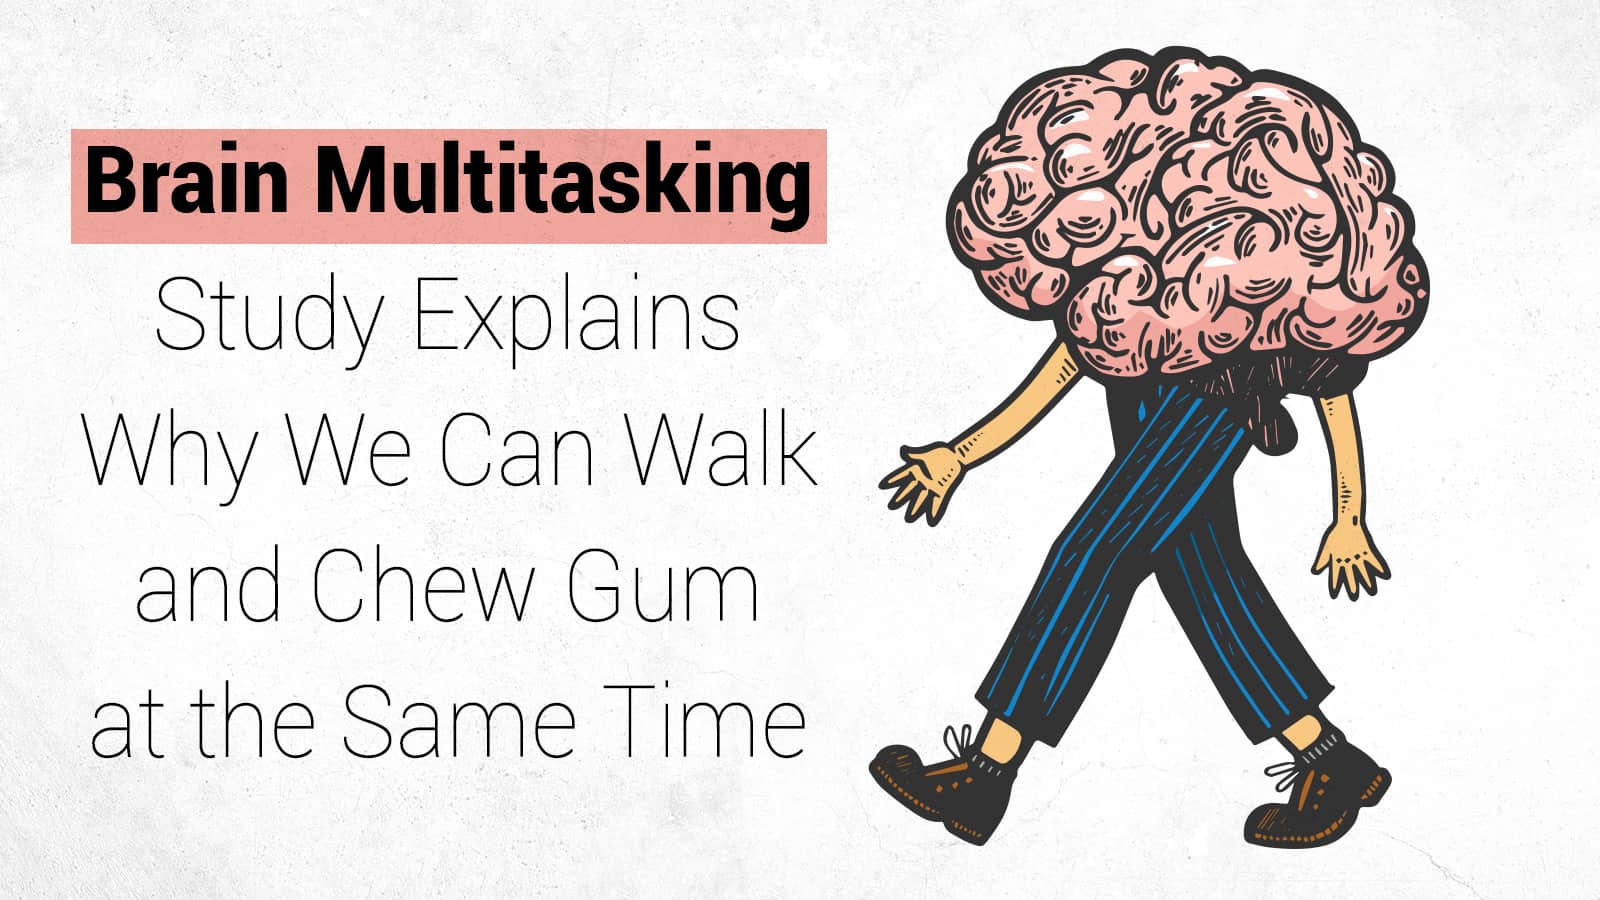 Brain Multitasking Study Explains Why We Can Walk and Chew Gum at the Same Time